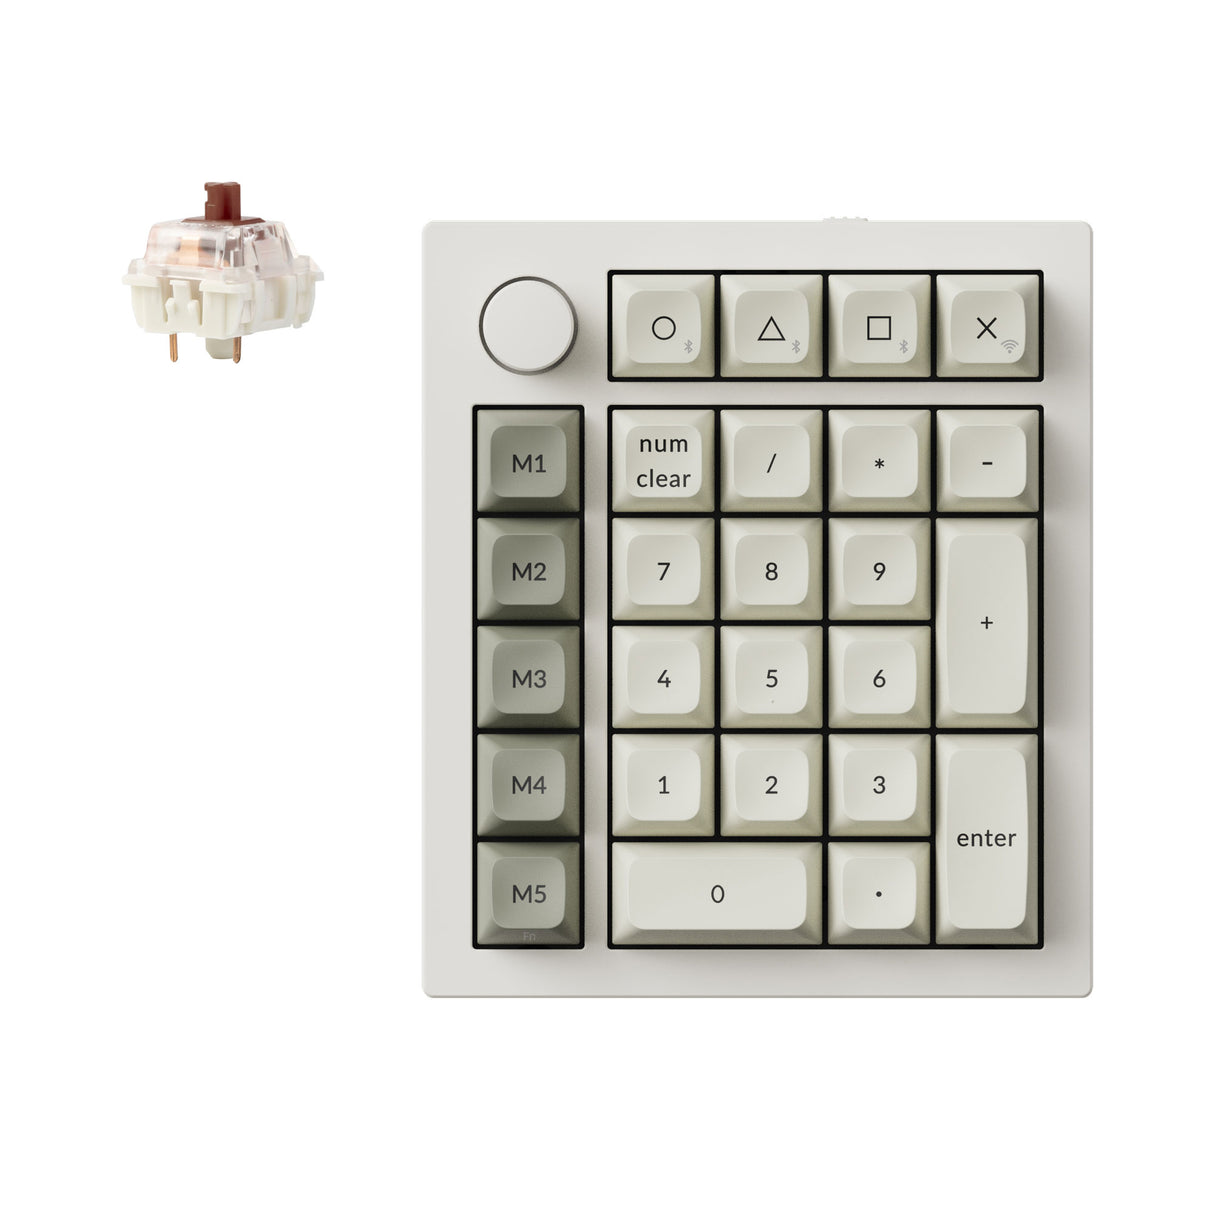 Keychron Q0 Max QMK/VIA custom number pad fully assembled knob full aluminum white frame for Mac Windows RGB backlight with hot-swappable Gateron Jupiter switch brown